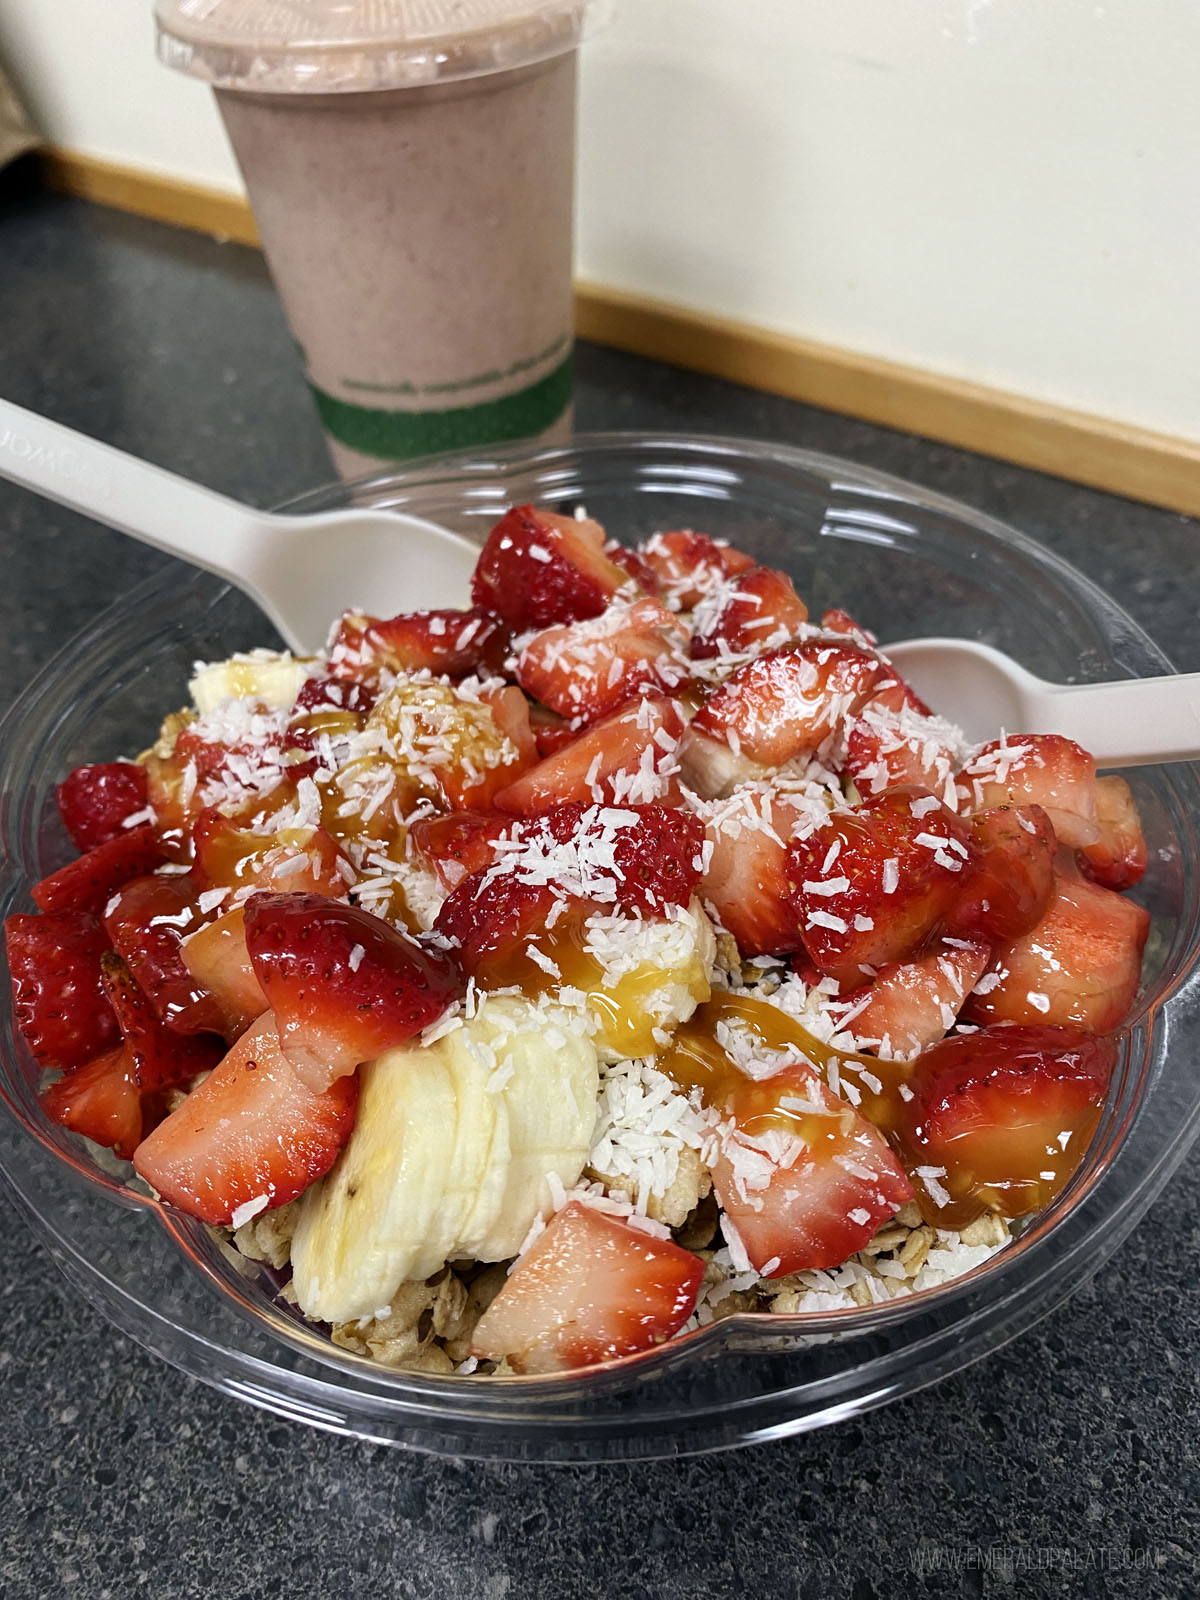 acai bowl and smoothie from a Maui grocery store